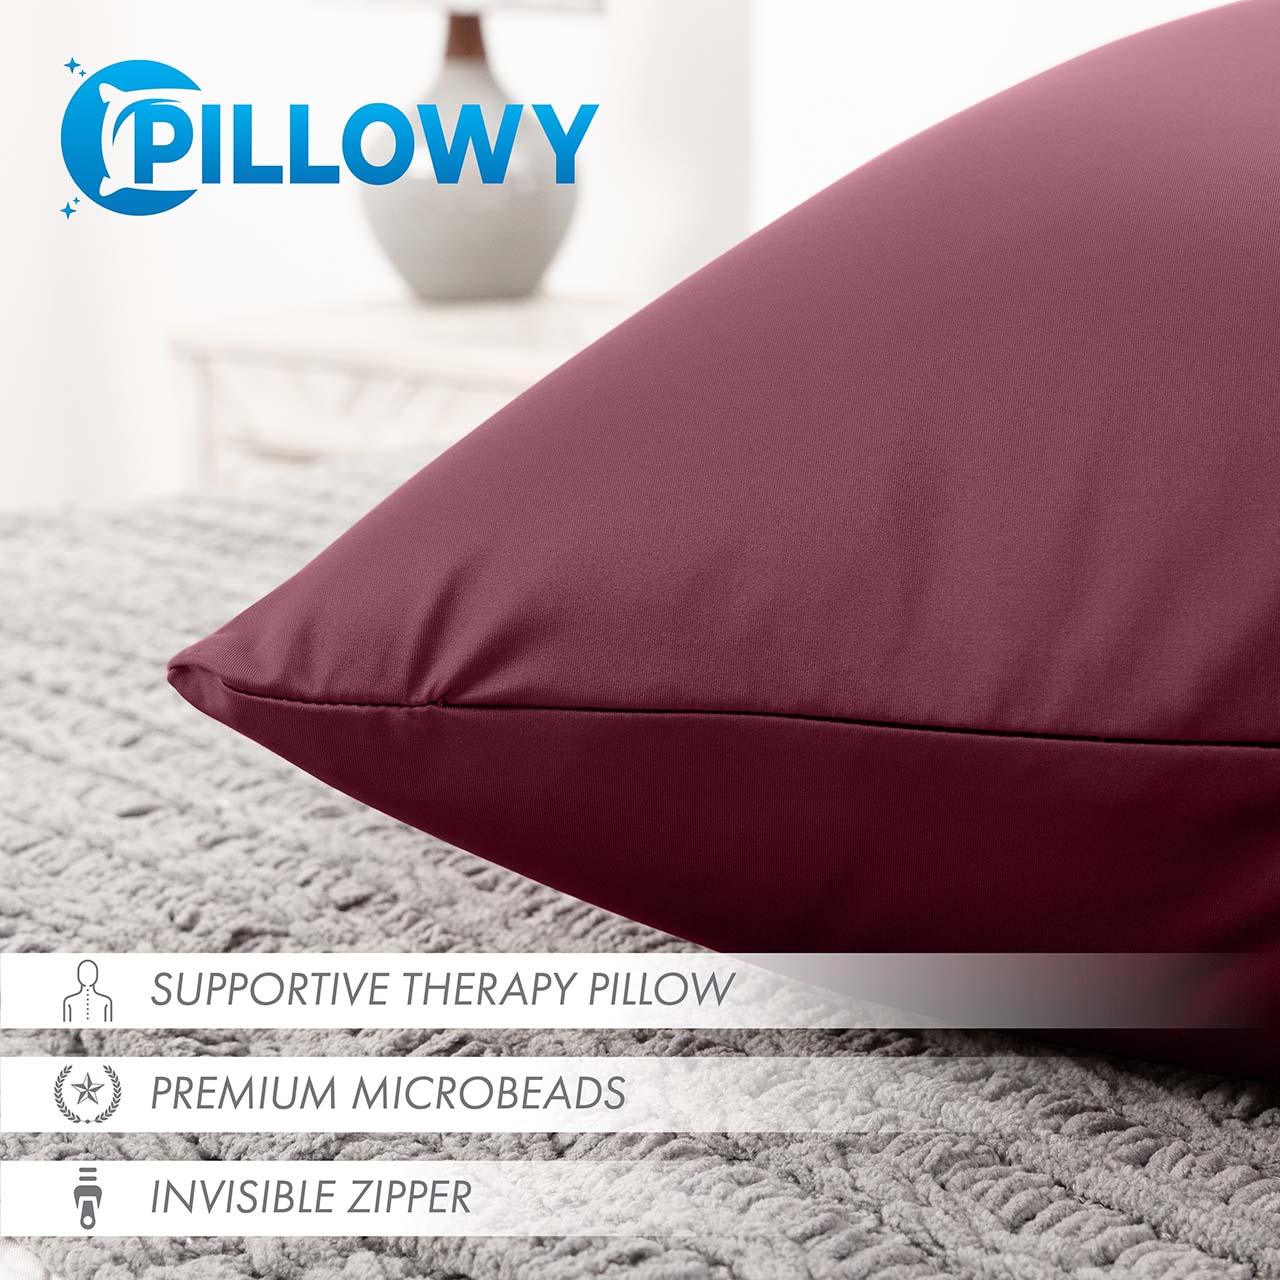 26 Pillow Projects That are Perfectly Cozy and Comfortable